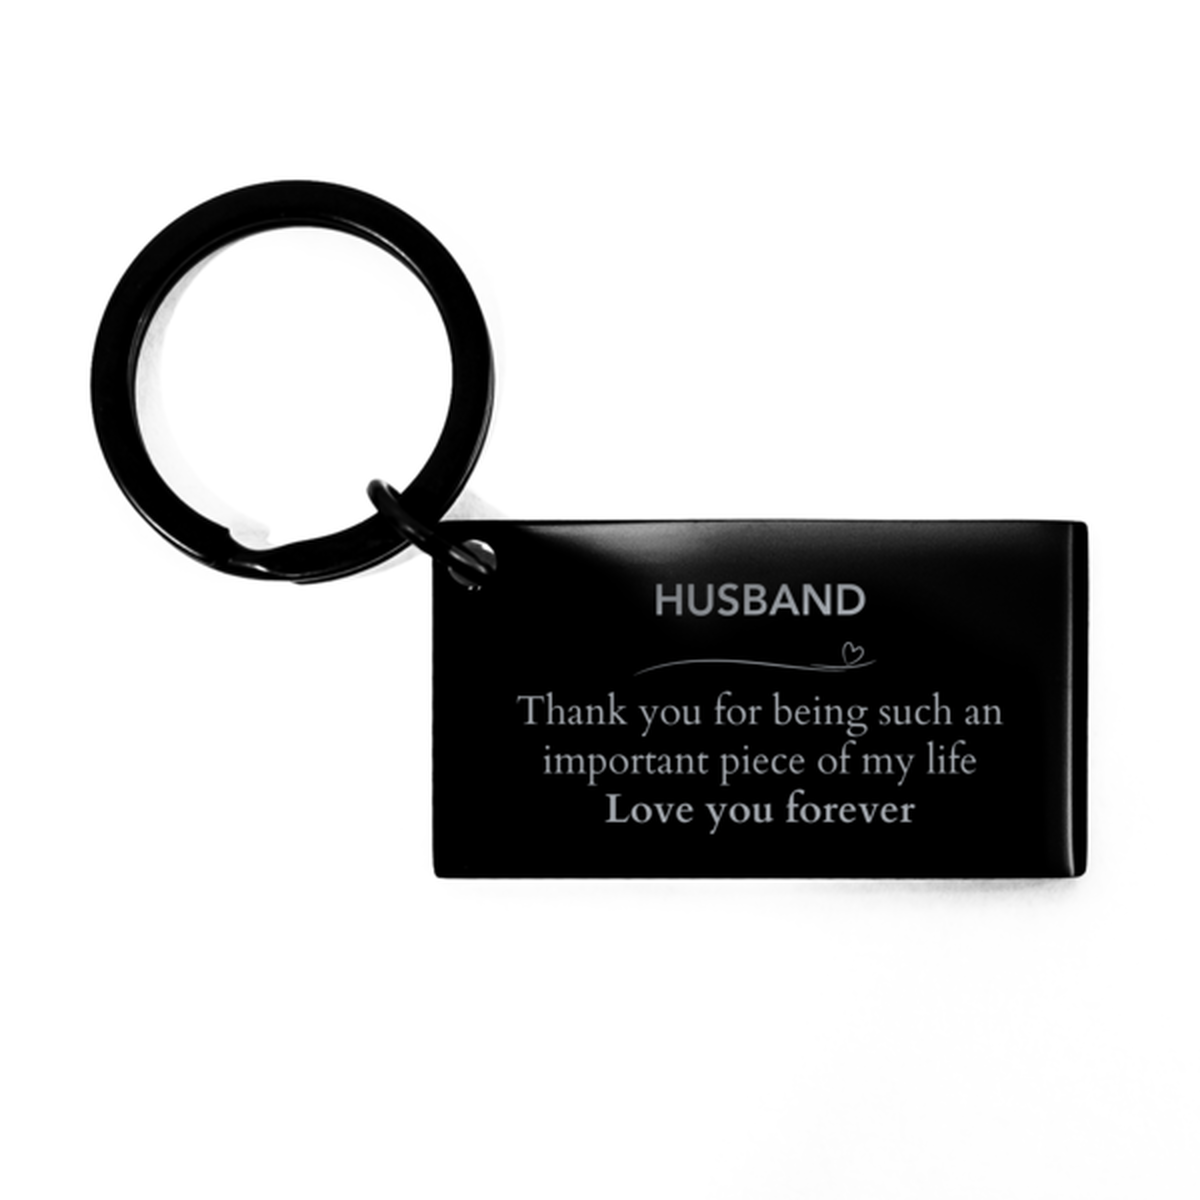 Appropriate Husband Keychain Epic Birthday Gifts for Husband Thank you for being such an important piece of my life Husband Christmas Mothers Fathers Day